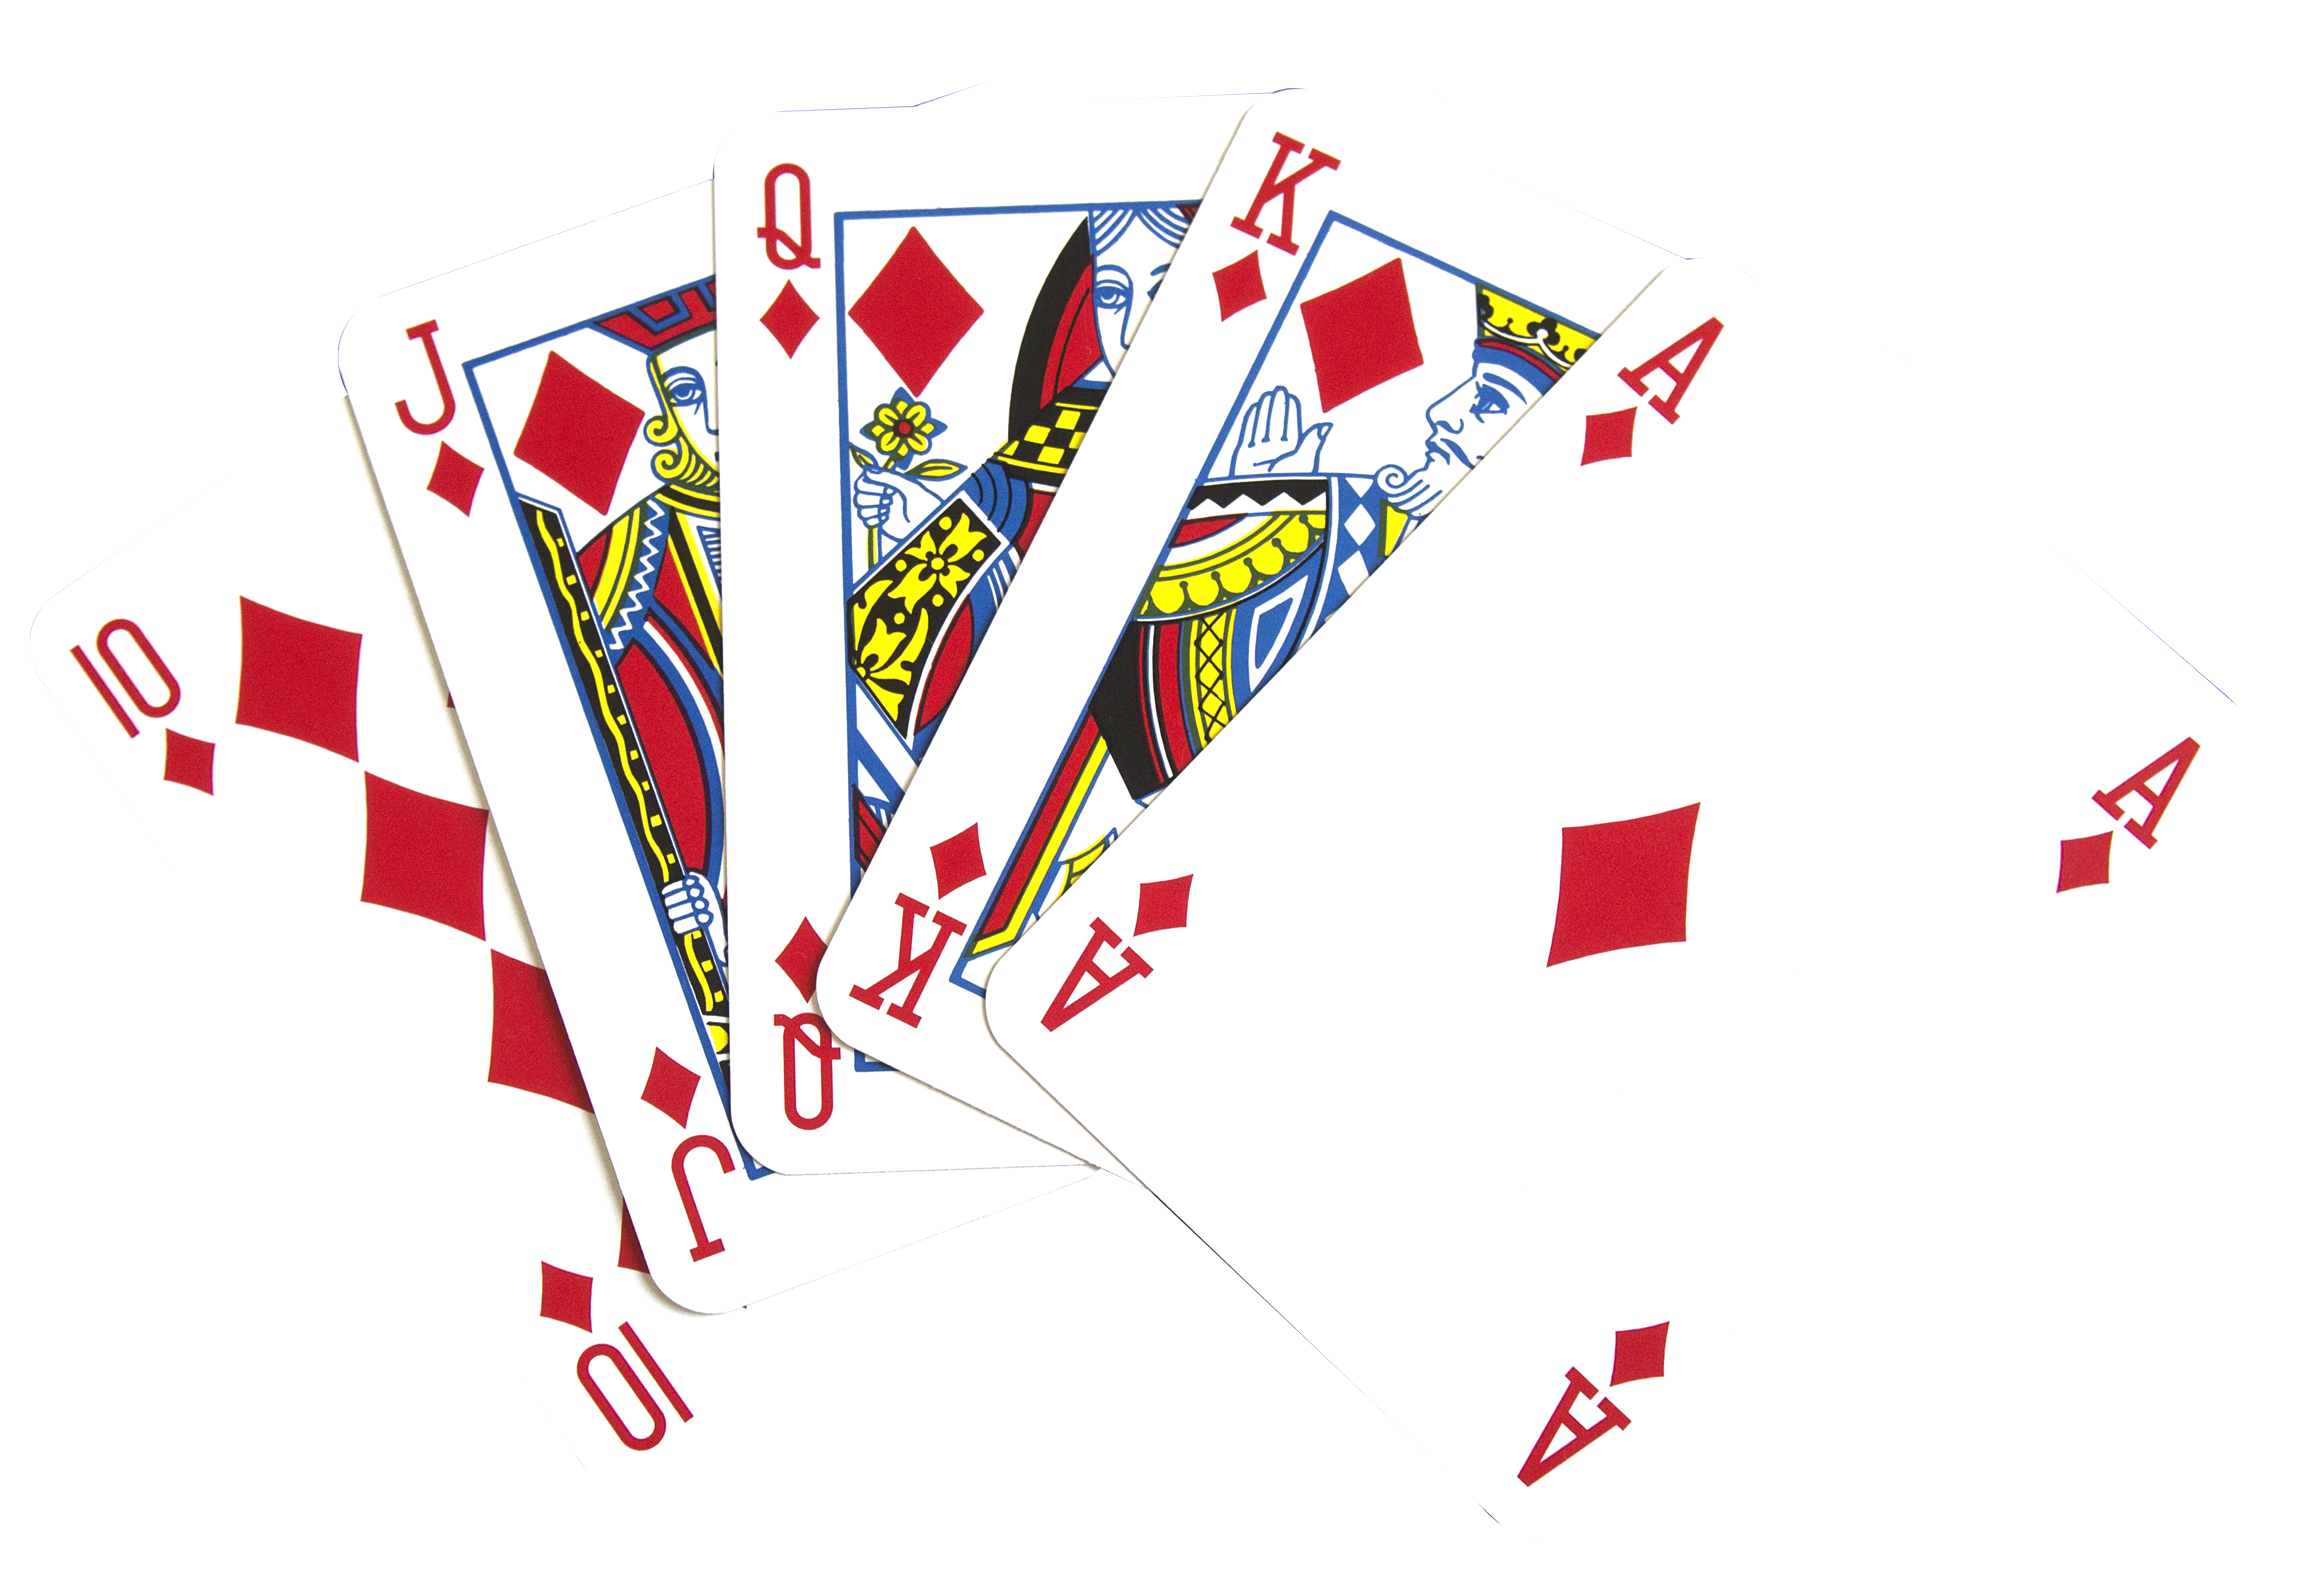 casino cards png